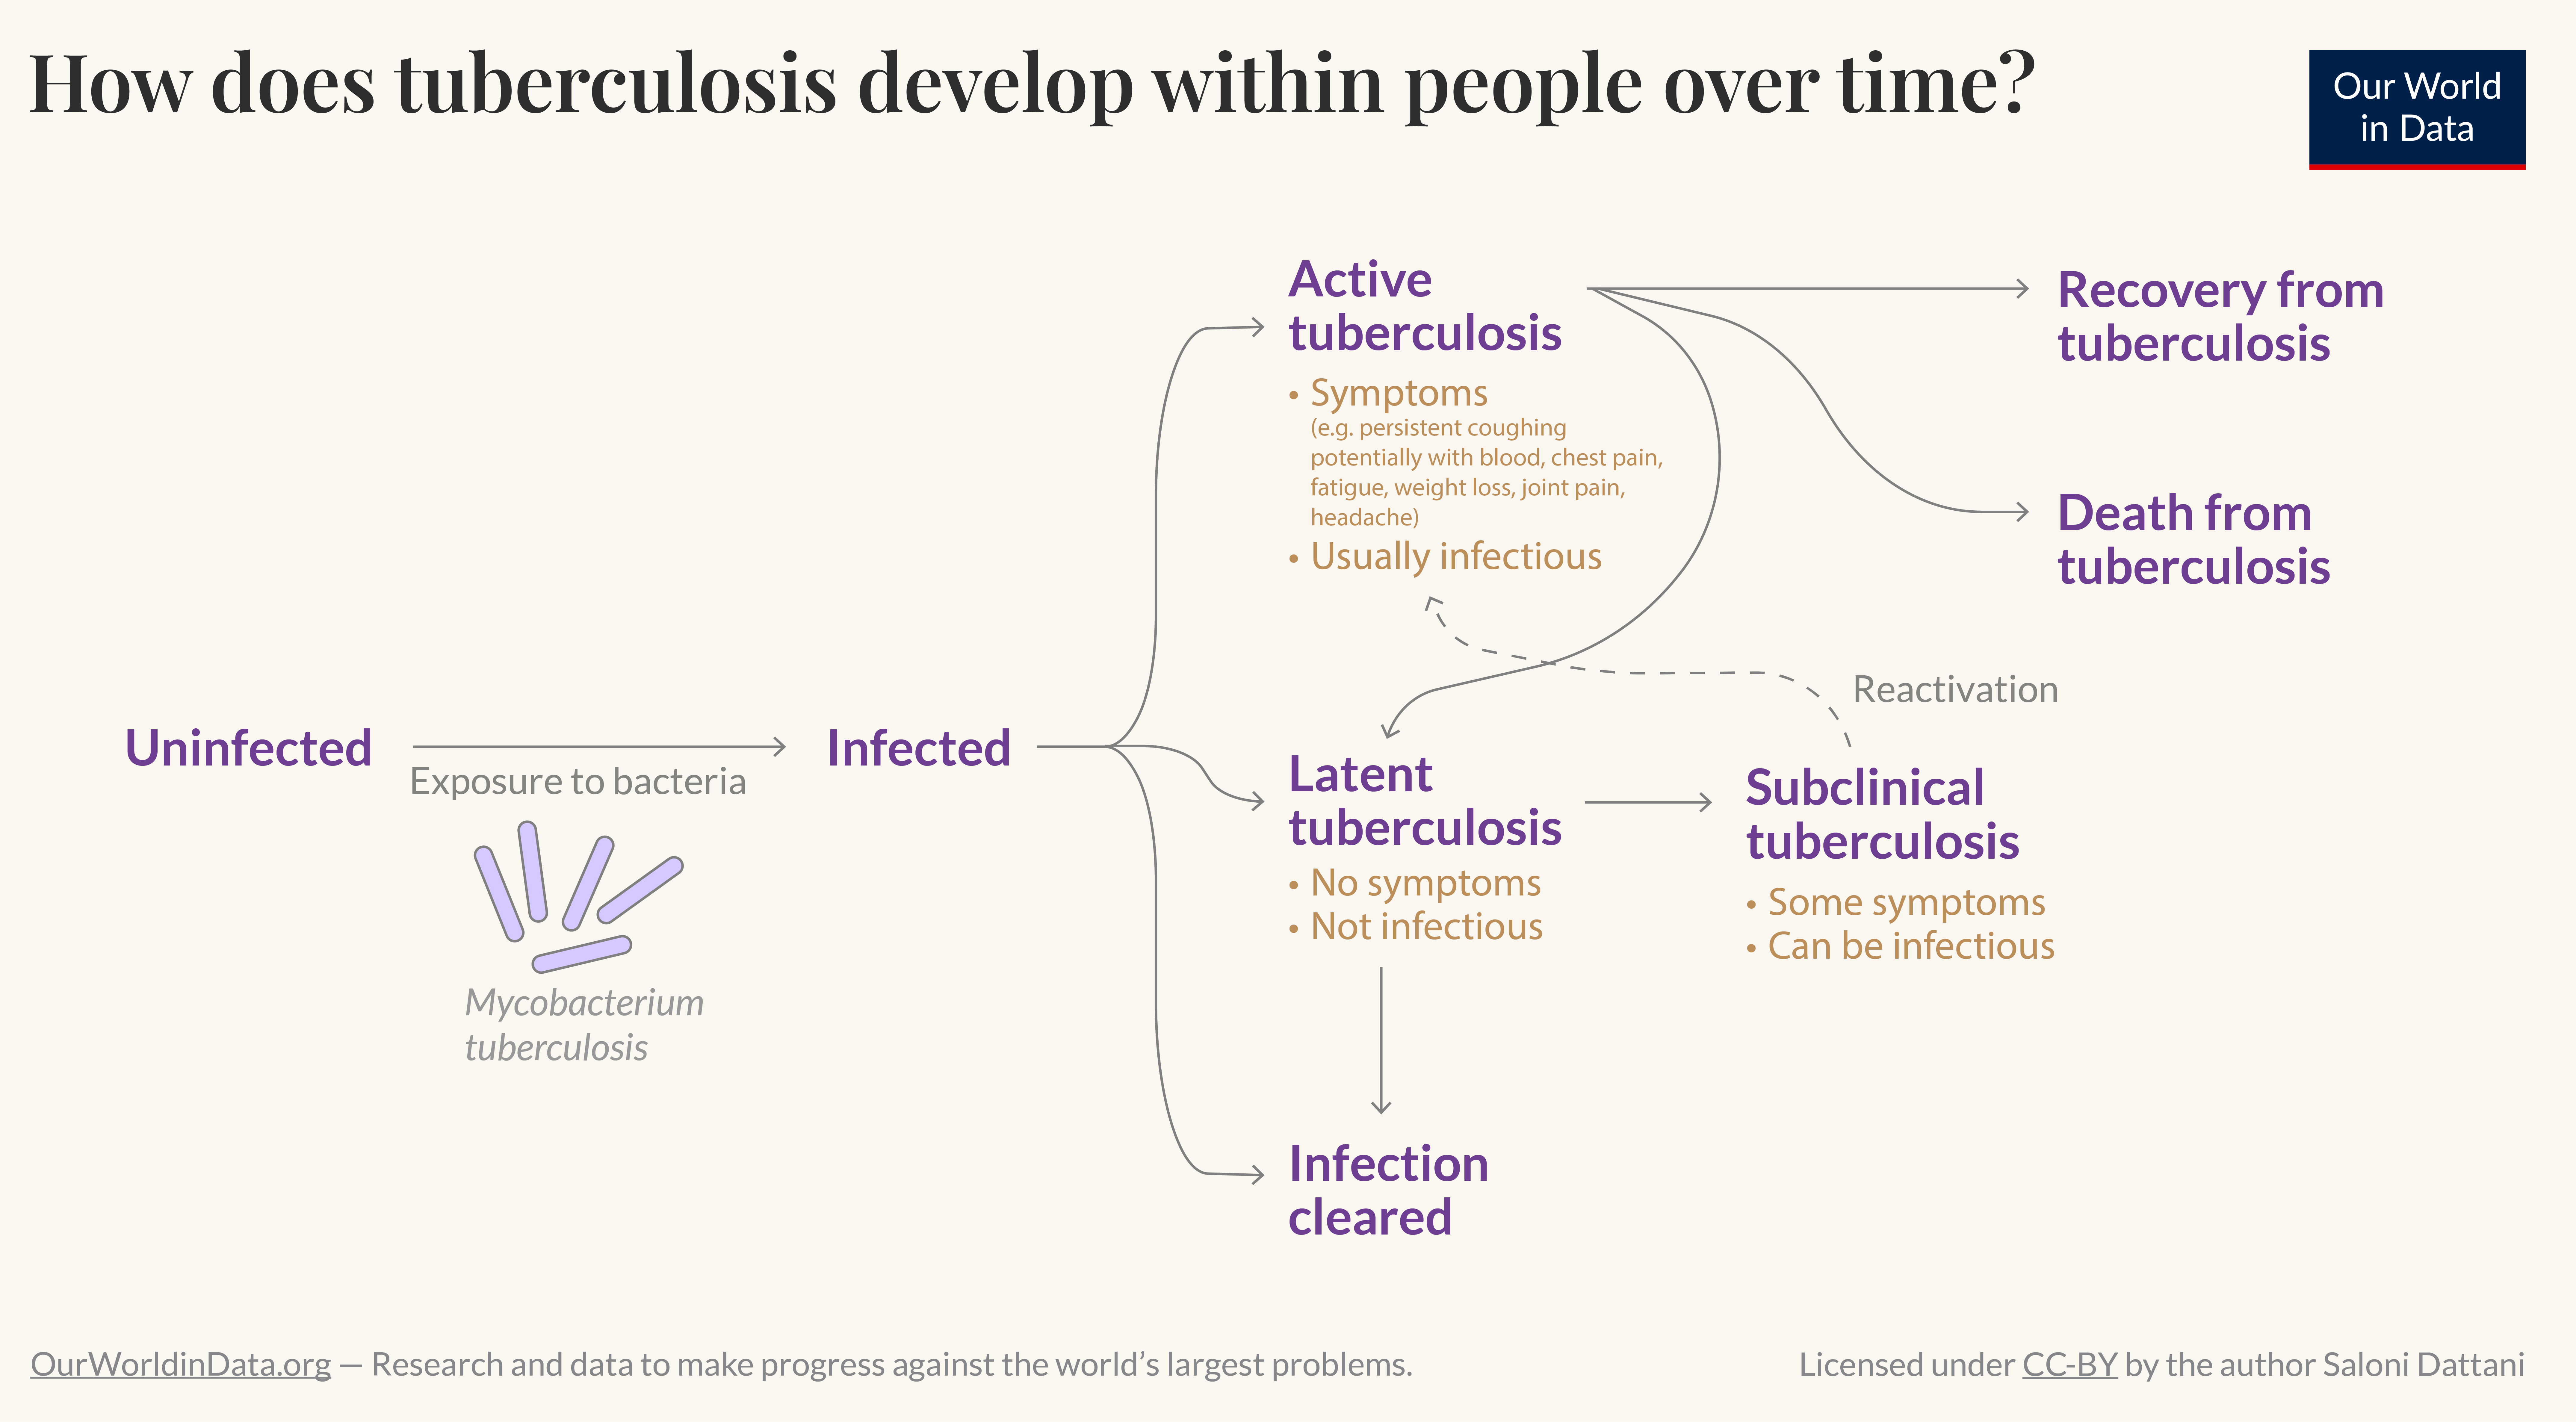 Flowchart showing natural history of tuberculosis in individuals